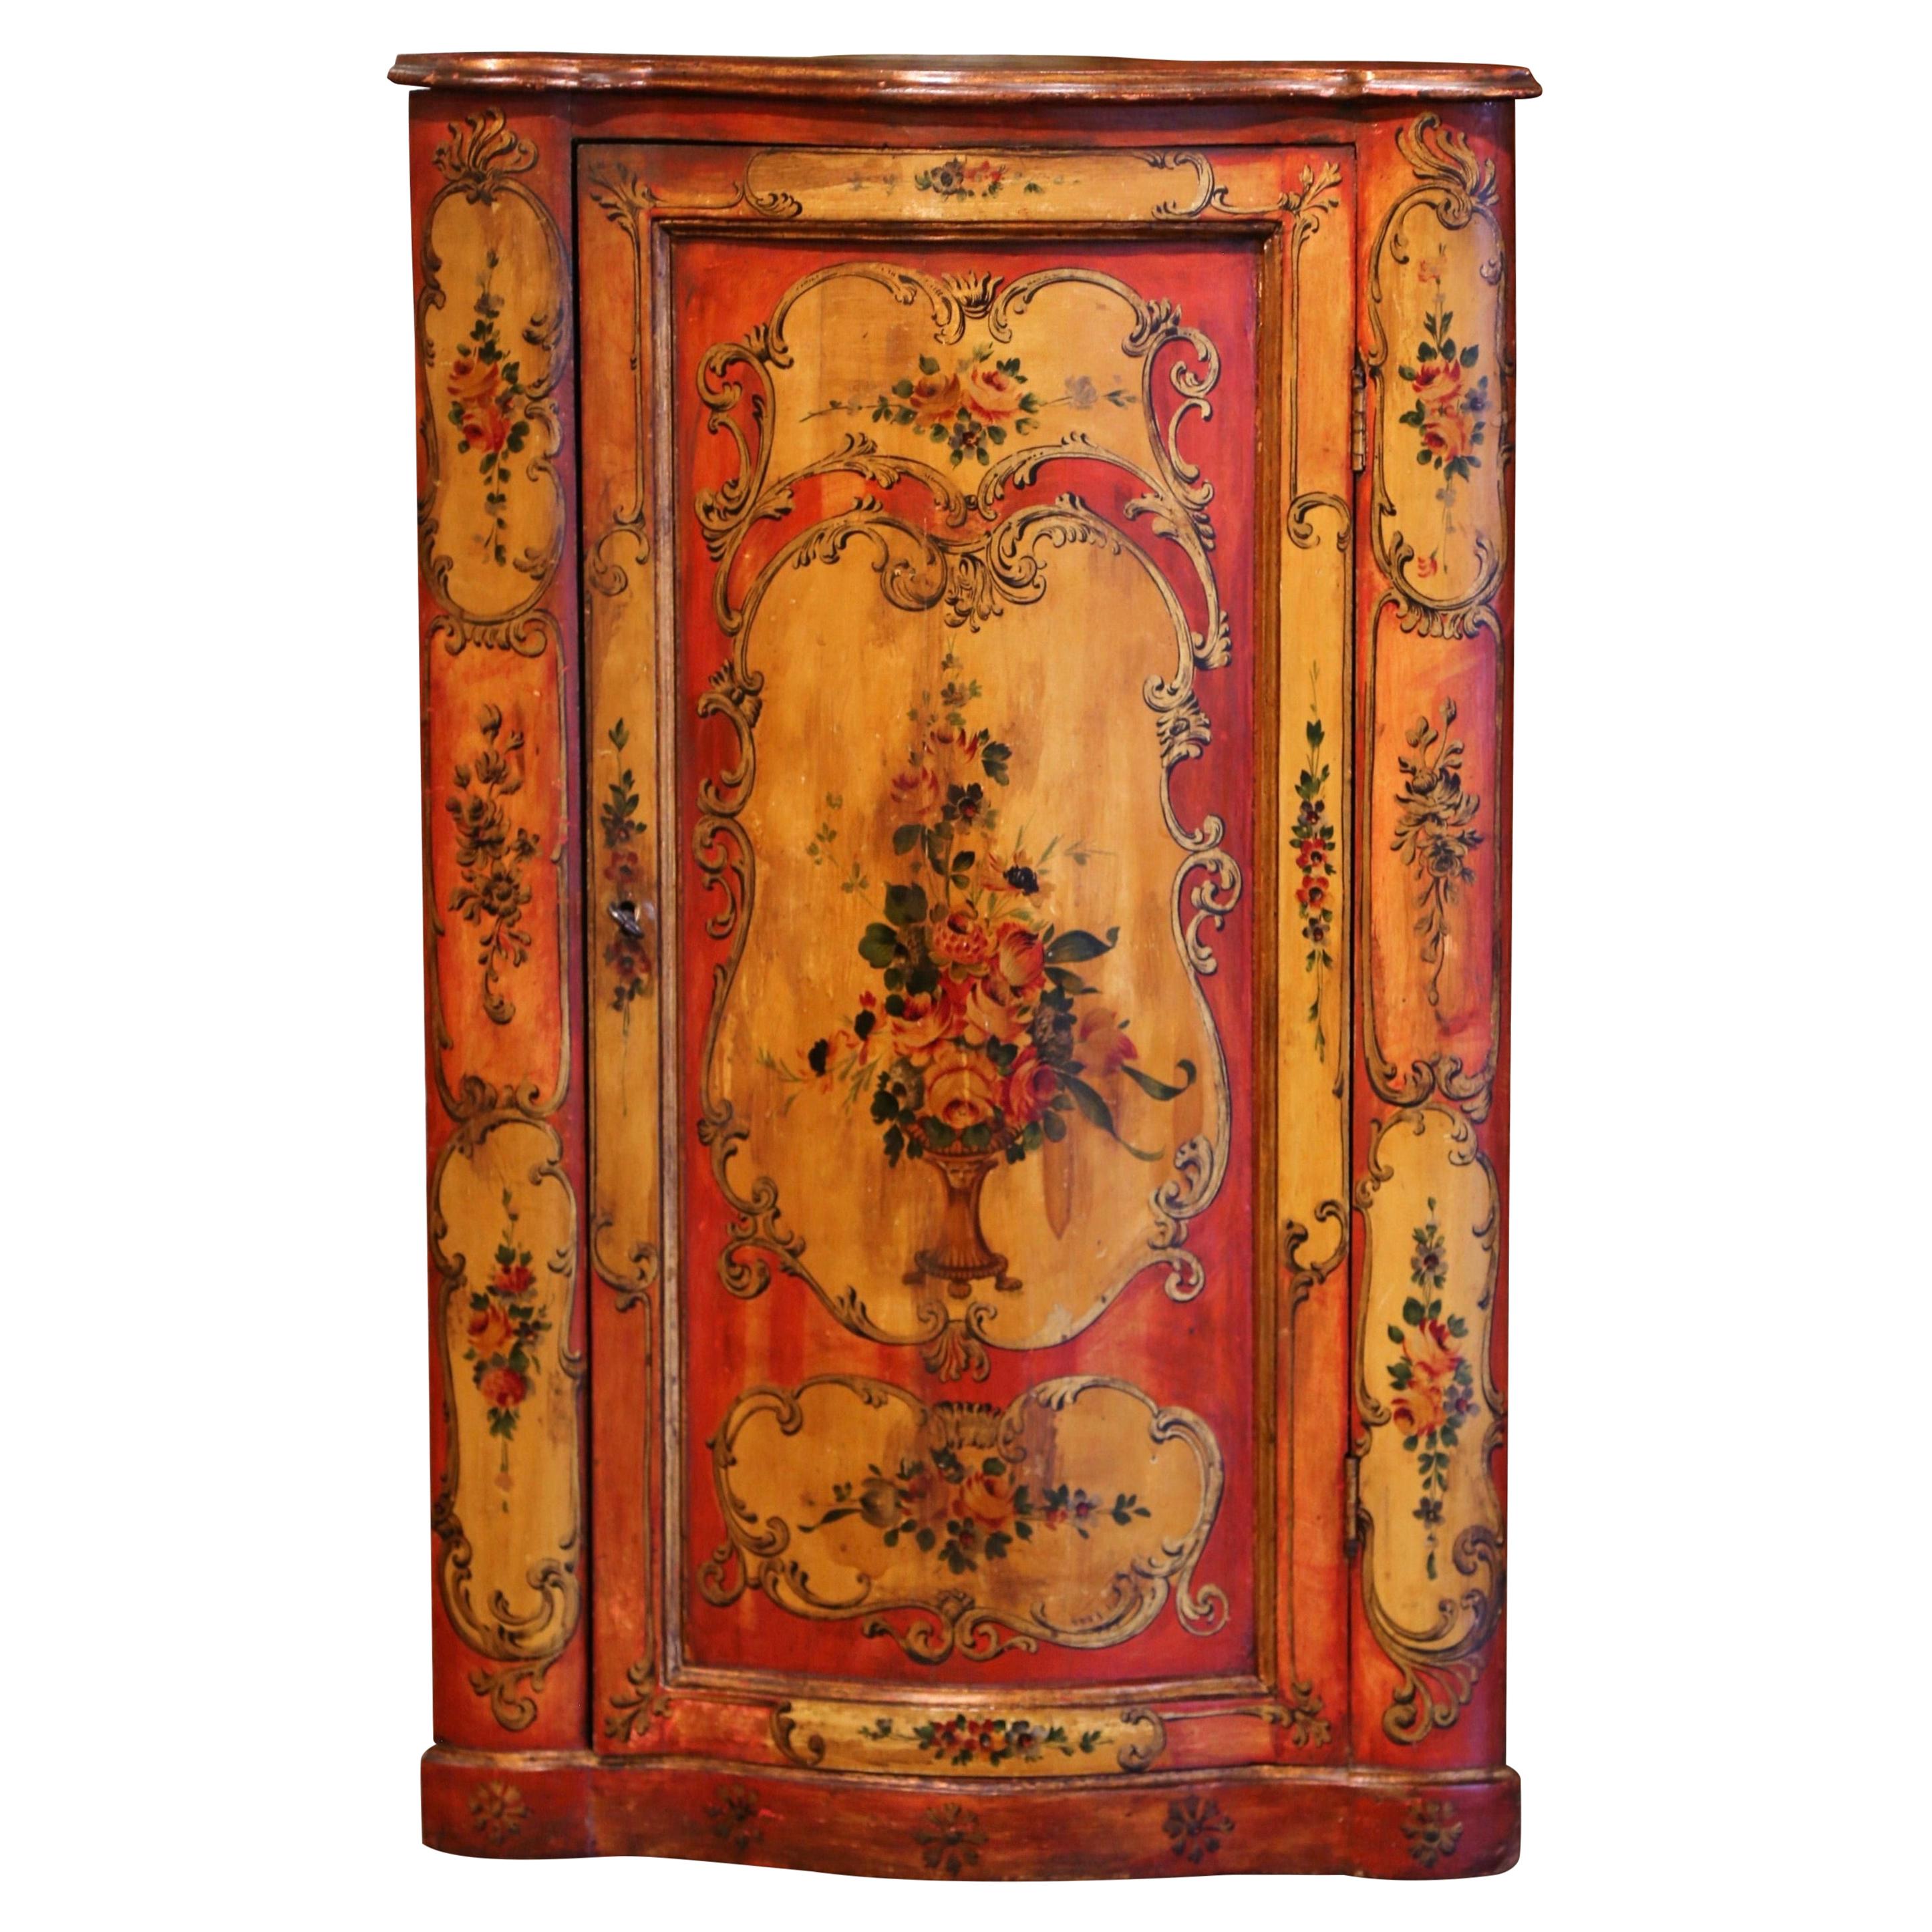 19th Century Italian Painted Bombe Corner Cabinet with Floral Motifs